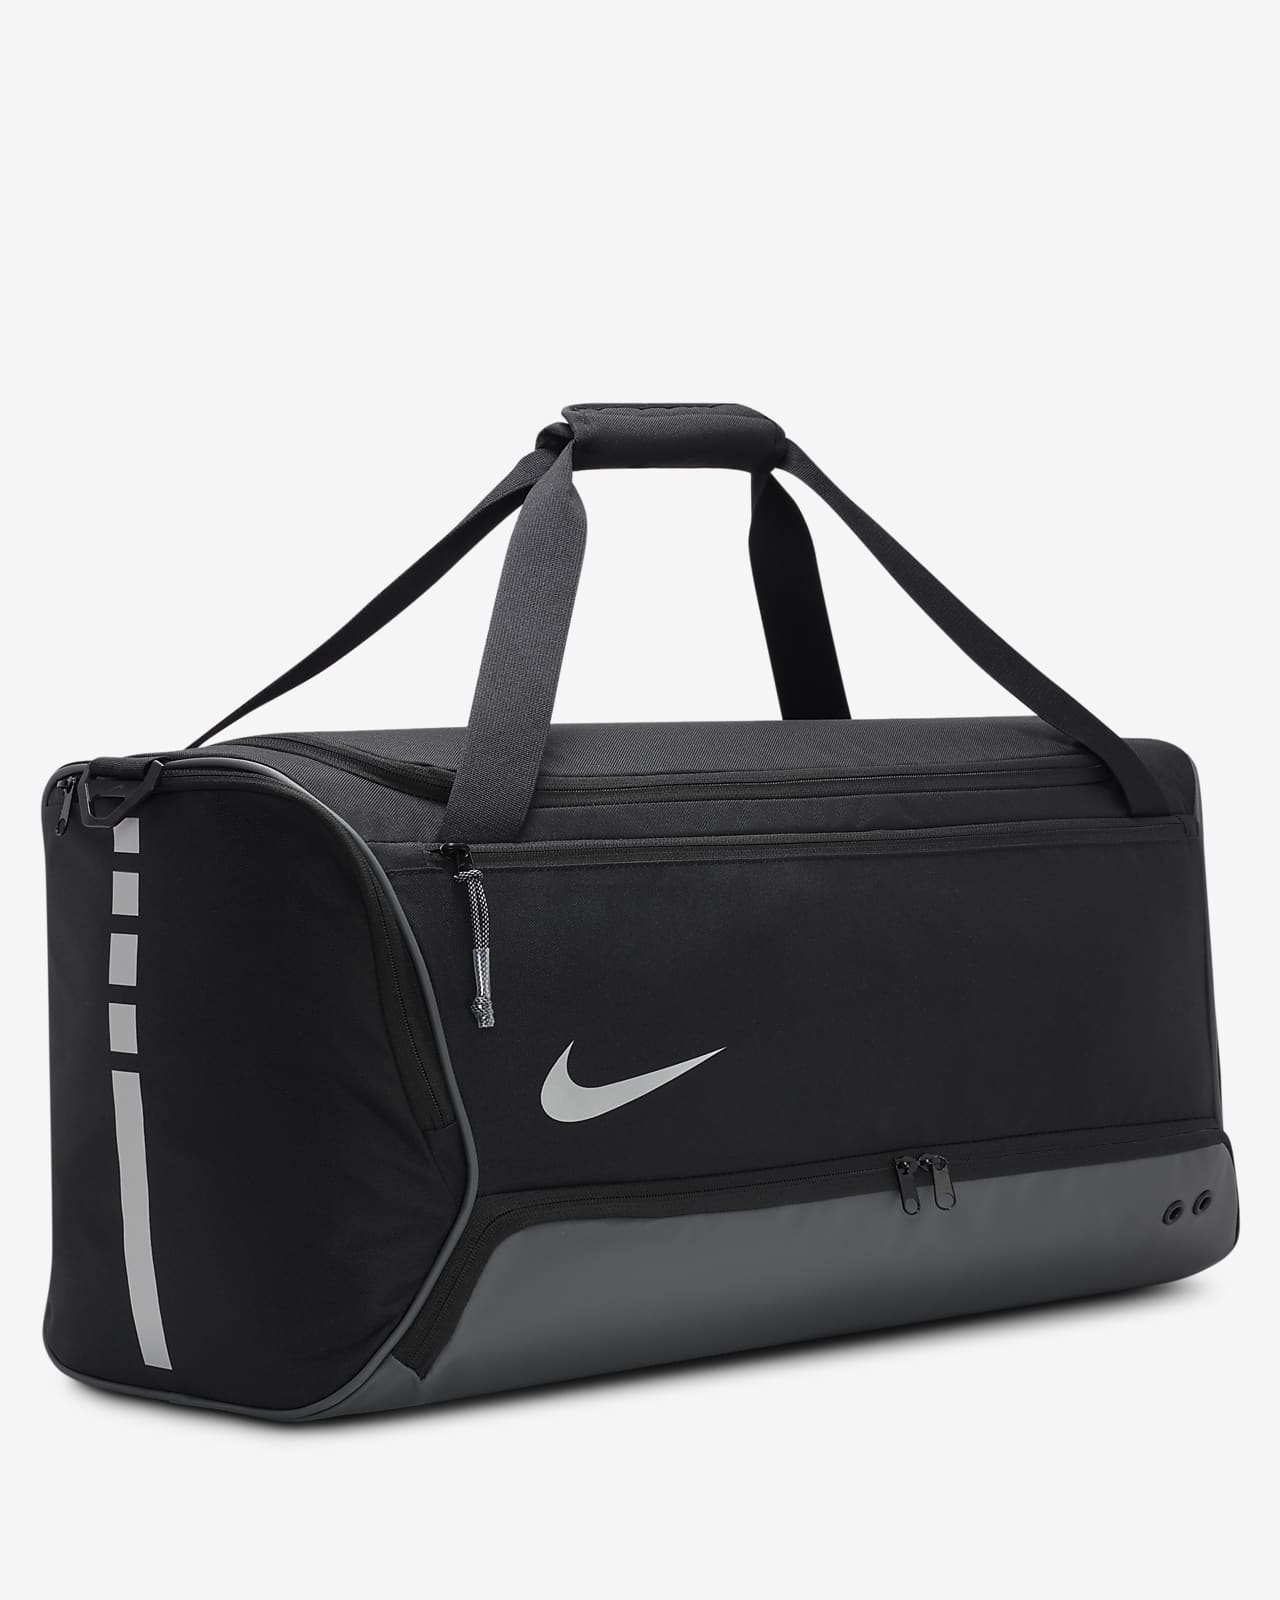 The Best Nike Bags for Basketball Gear. Nike CA